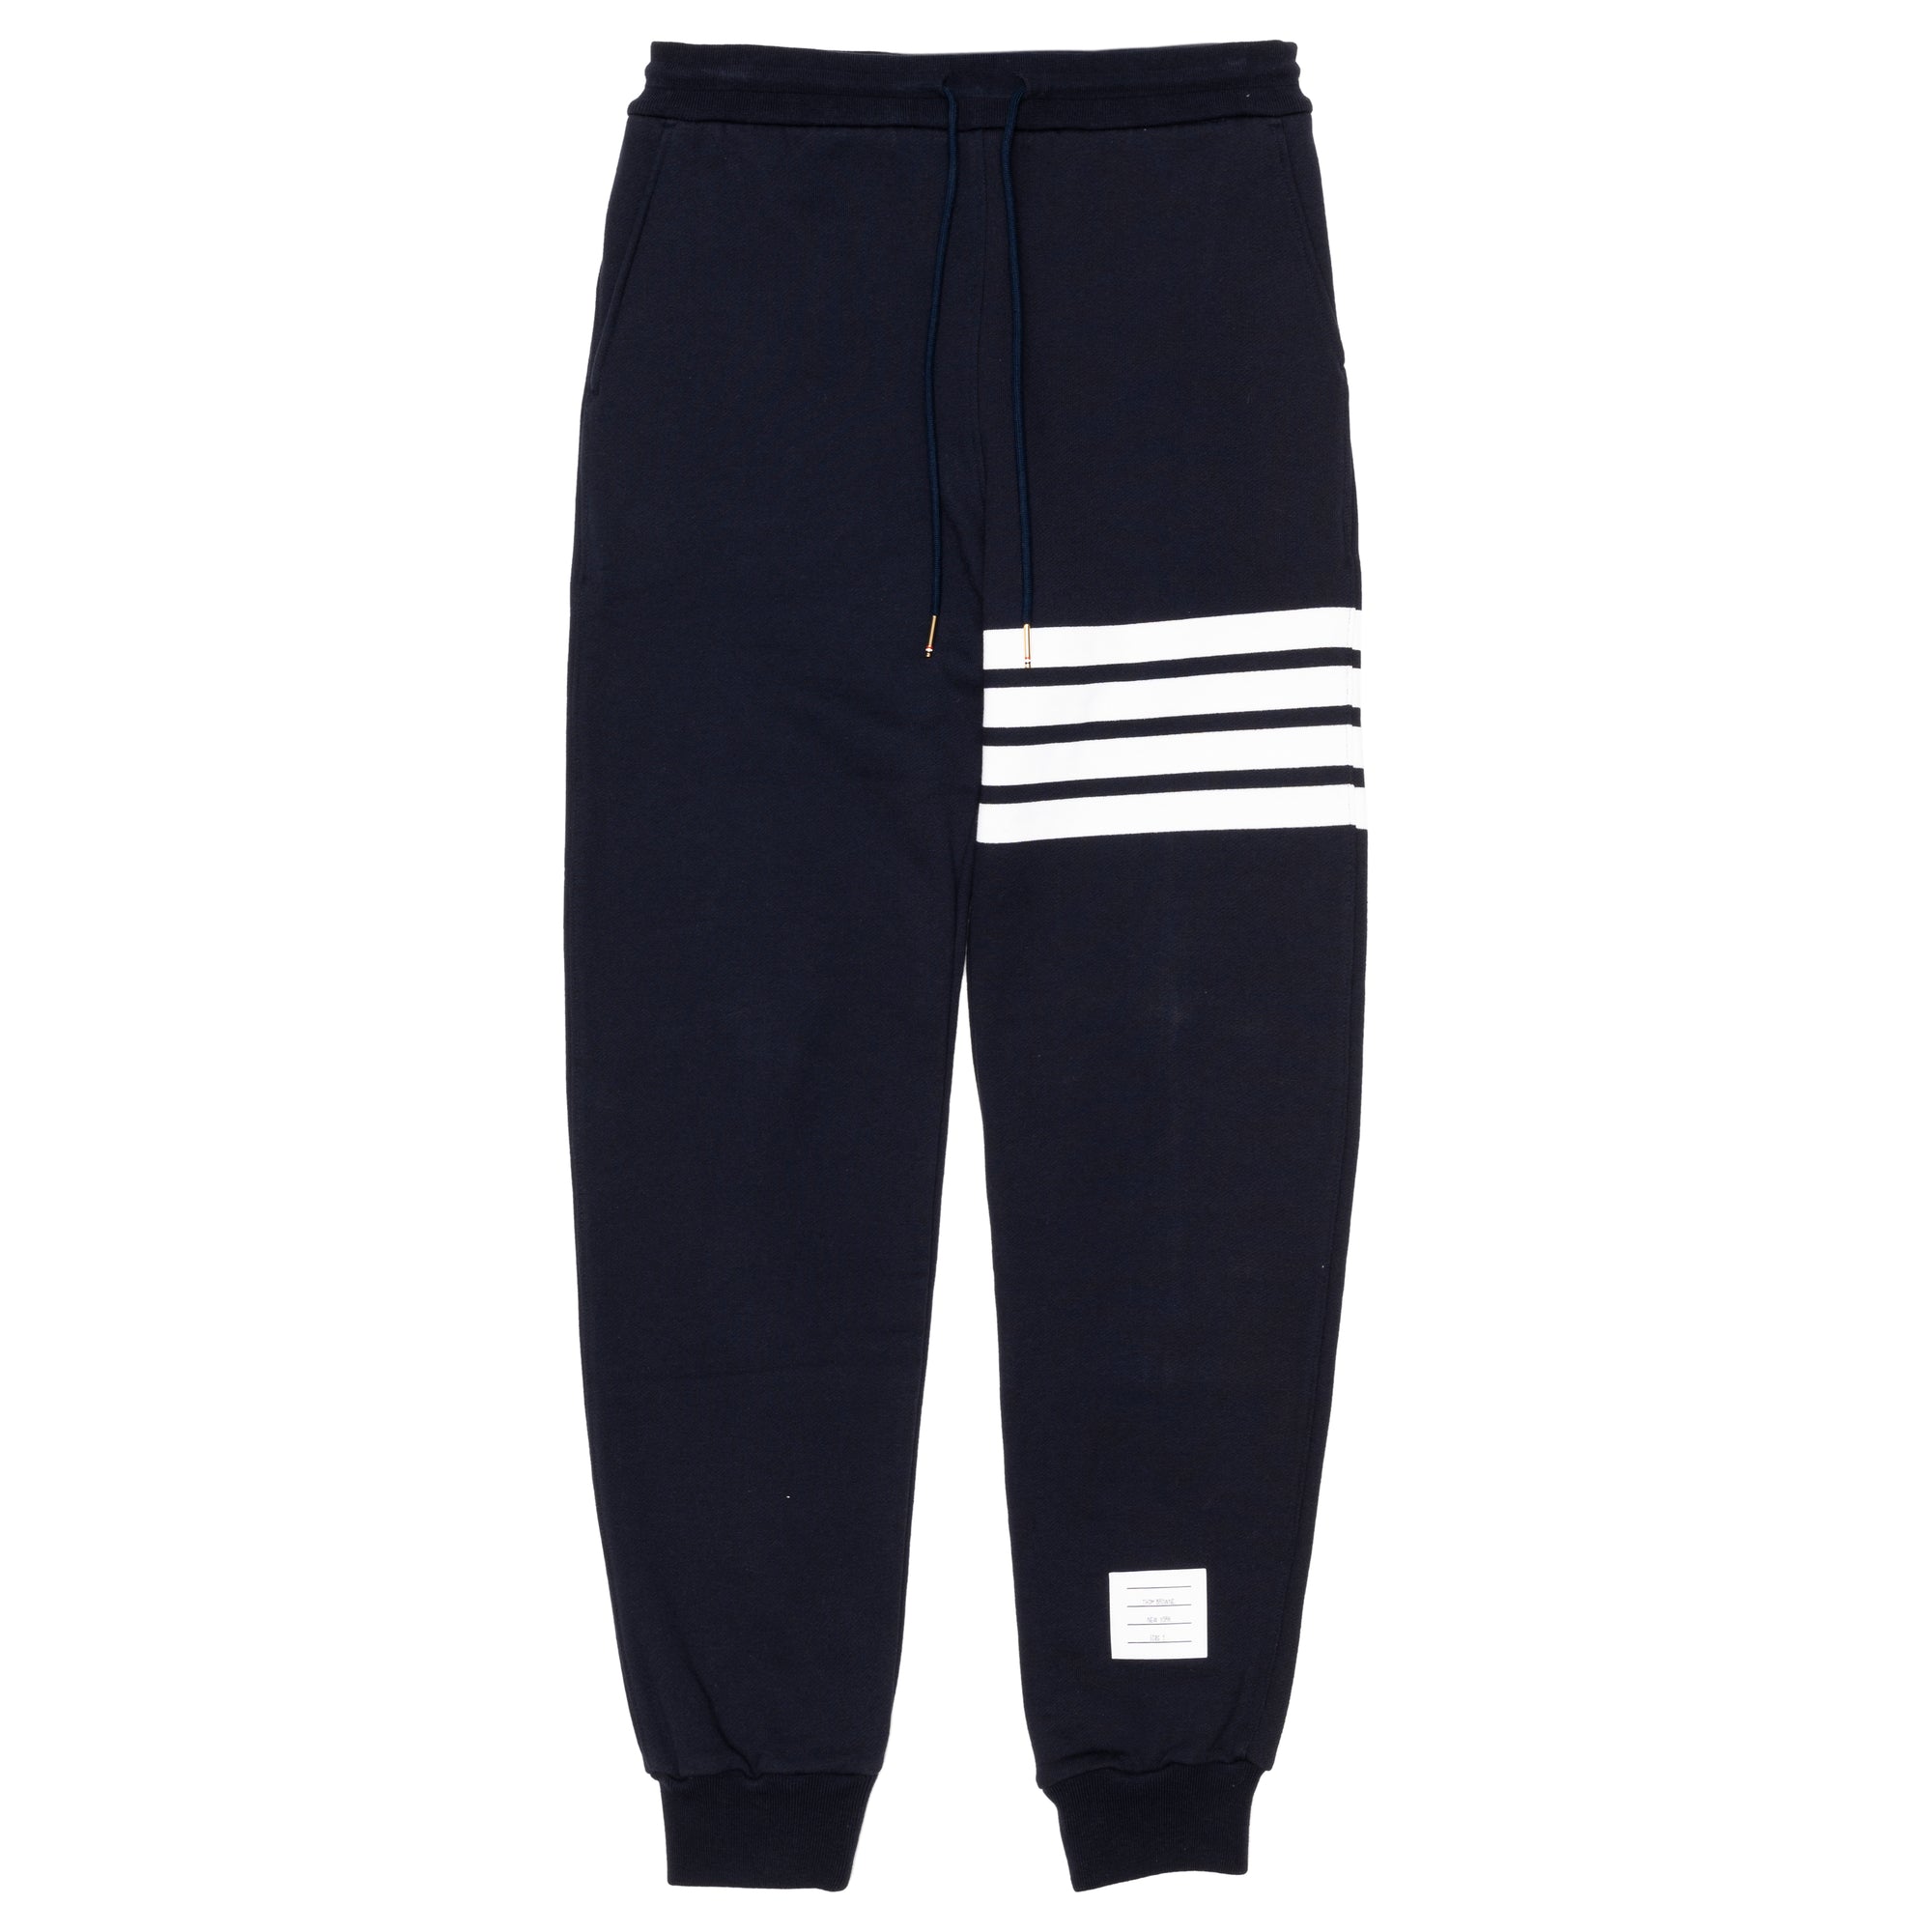 THOM BROWNE - MENS CLASSIC SWEATPANT WITH ENGINEE - NAVY - (MJQ008H-00535) view 1